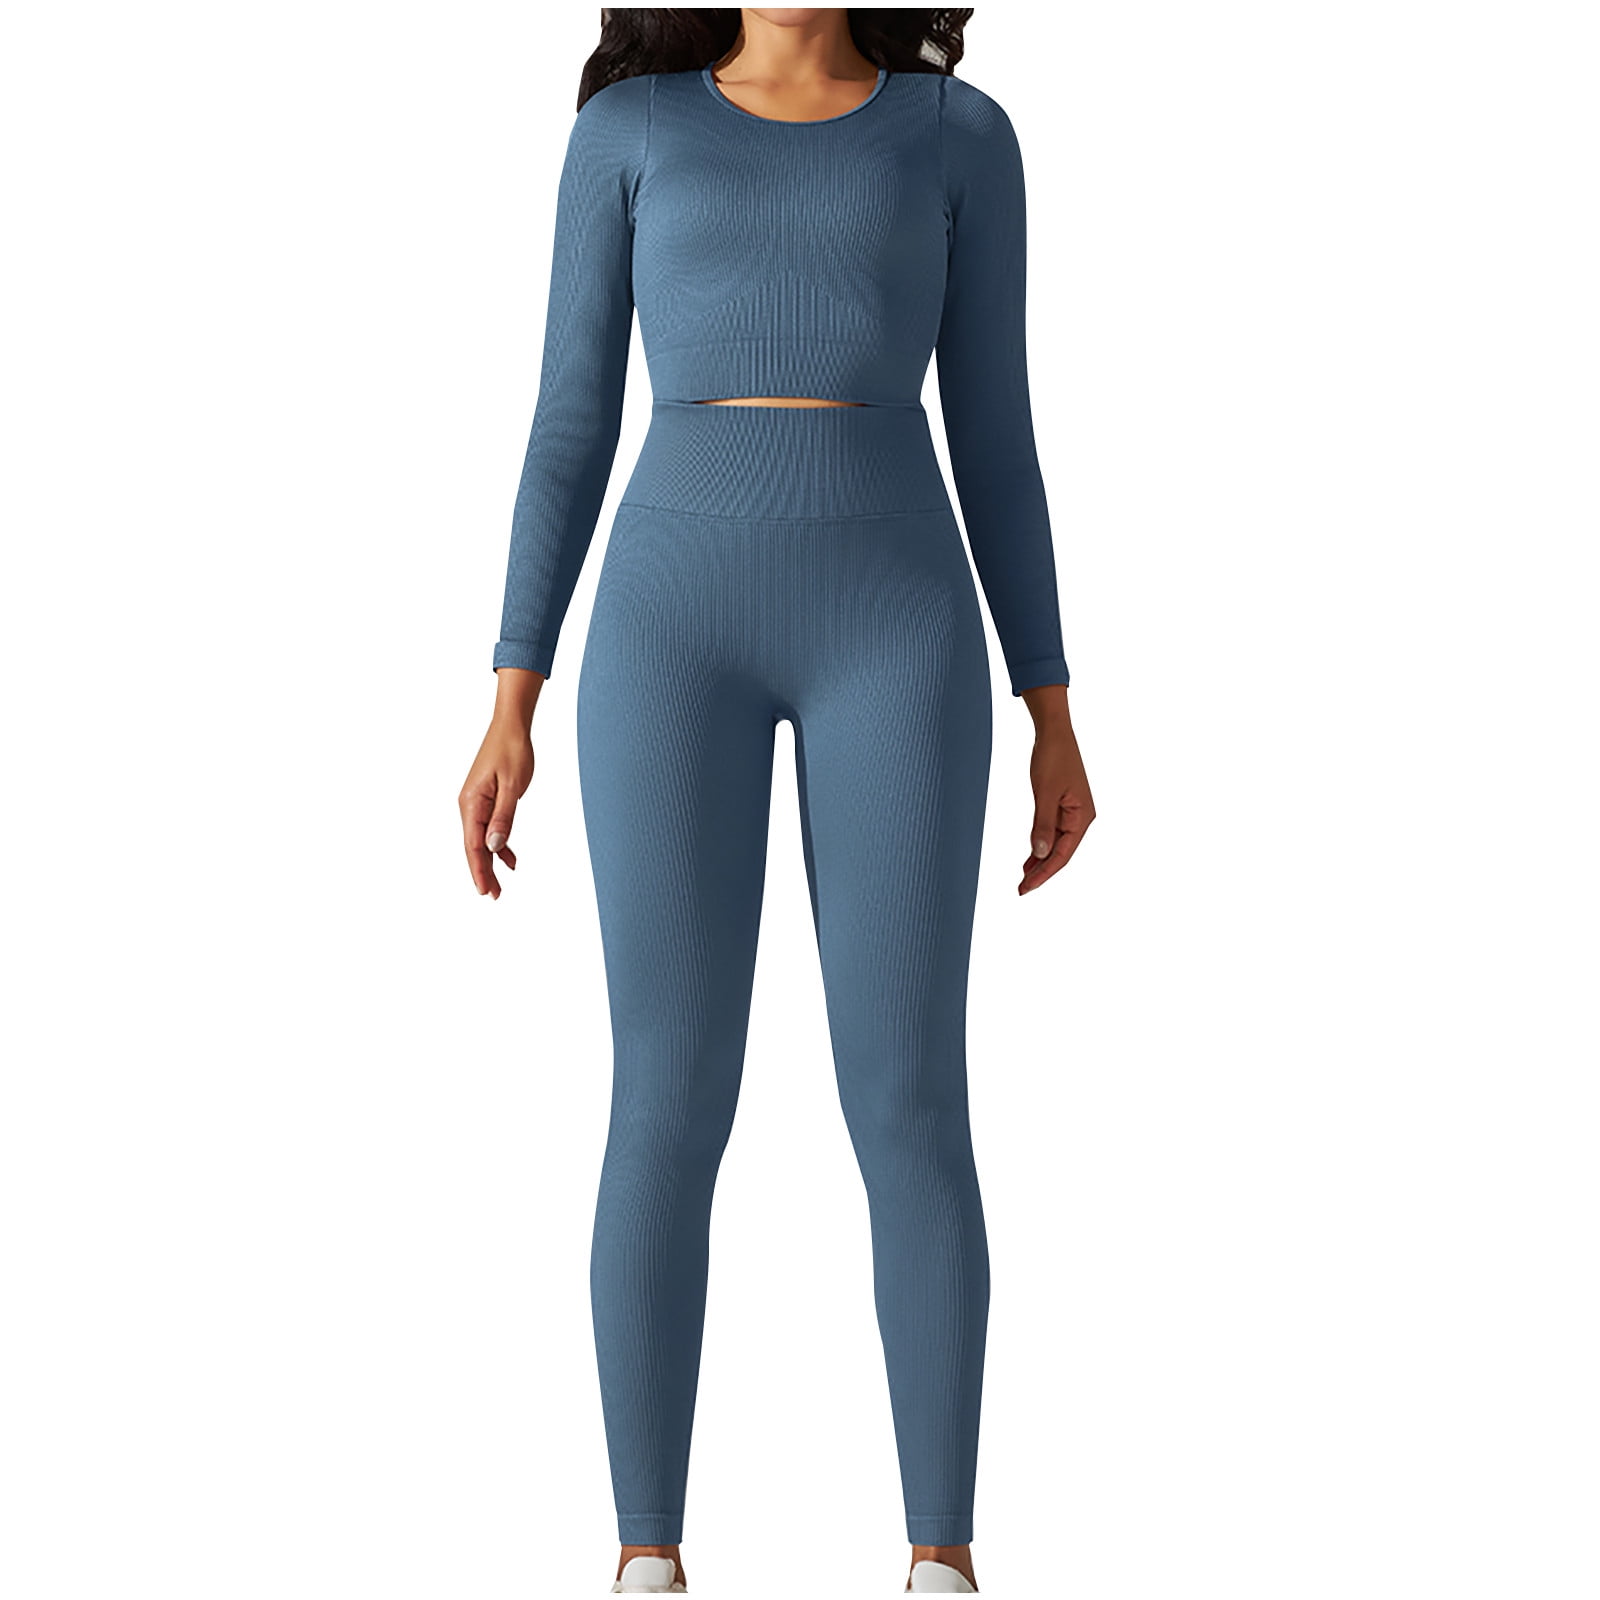 Zadine Sports 2 Pcs Set Of Tops And Jeggings at Rs 350/piece